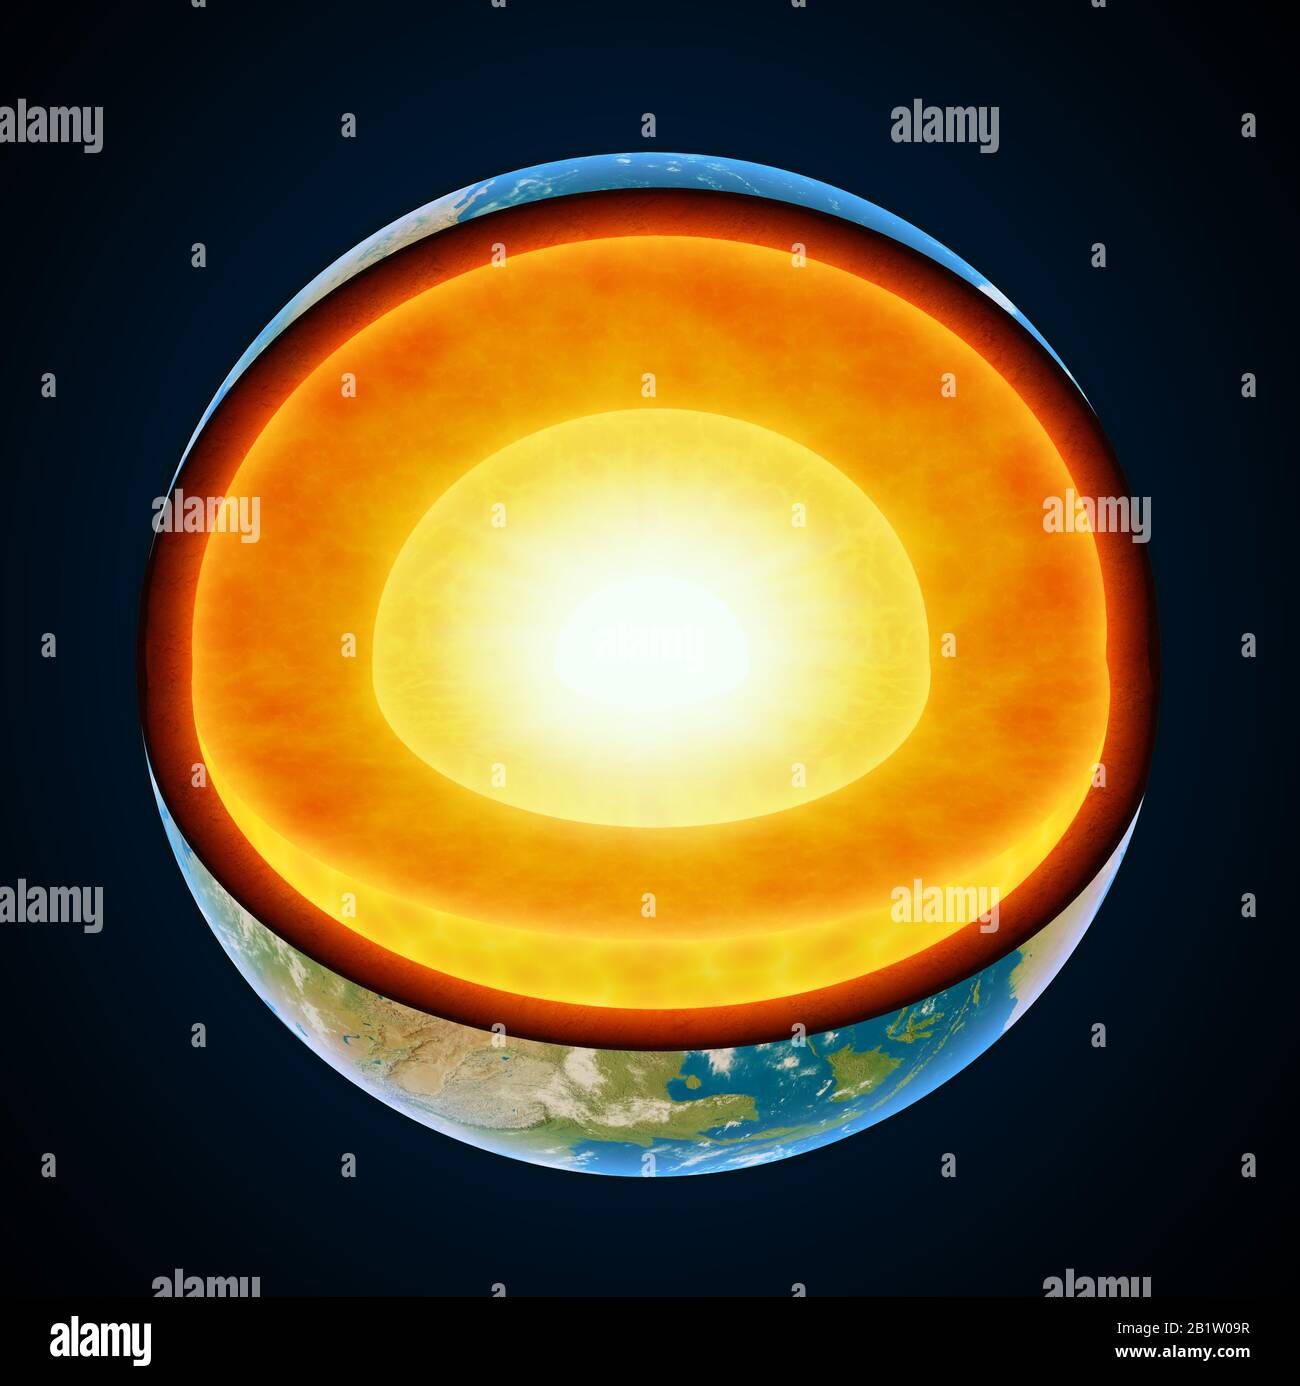 Earth cut-away with geological composition of the planet - 3D illustration Stock Photo